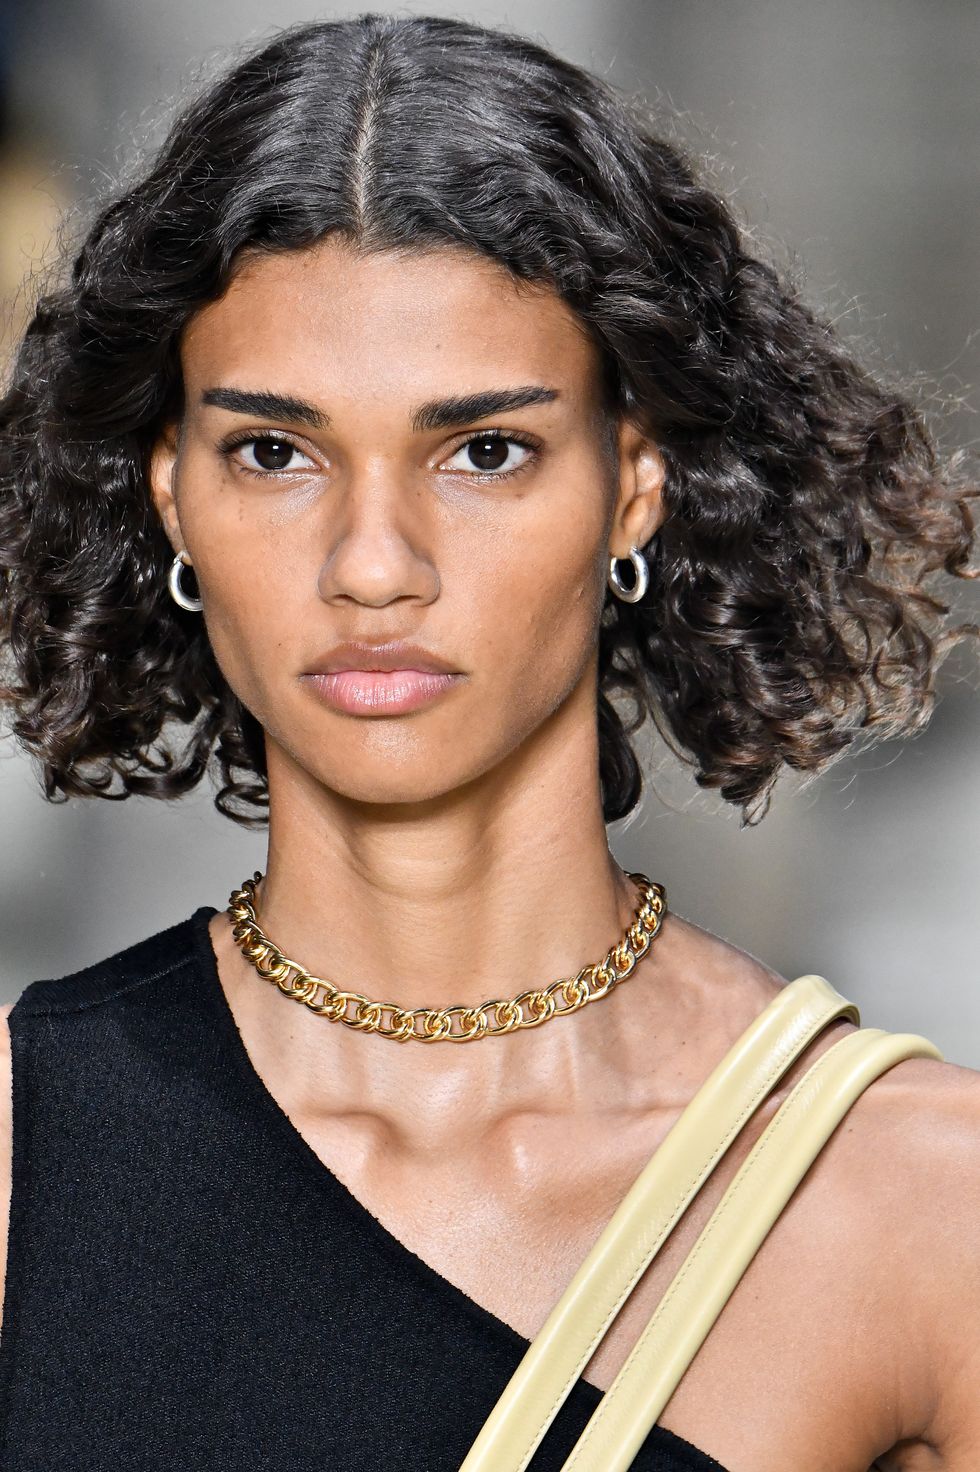 Spring 2020 Jewelry Trends, From Affordable To Luxury